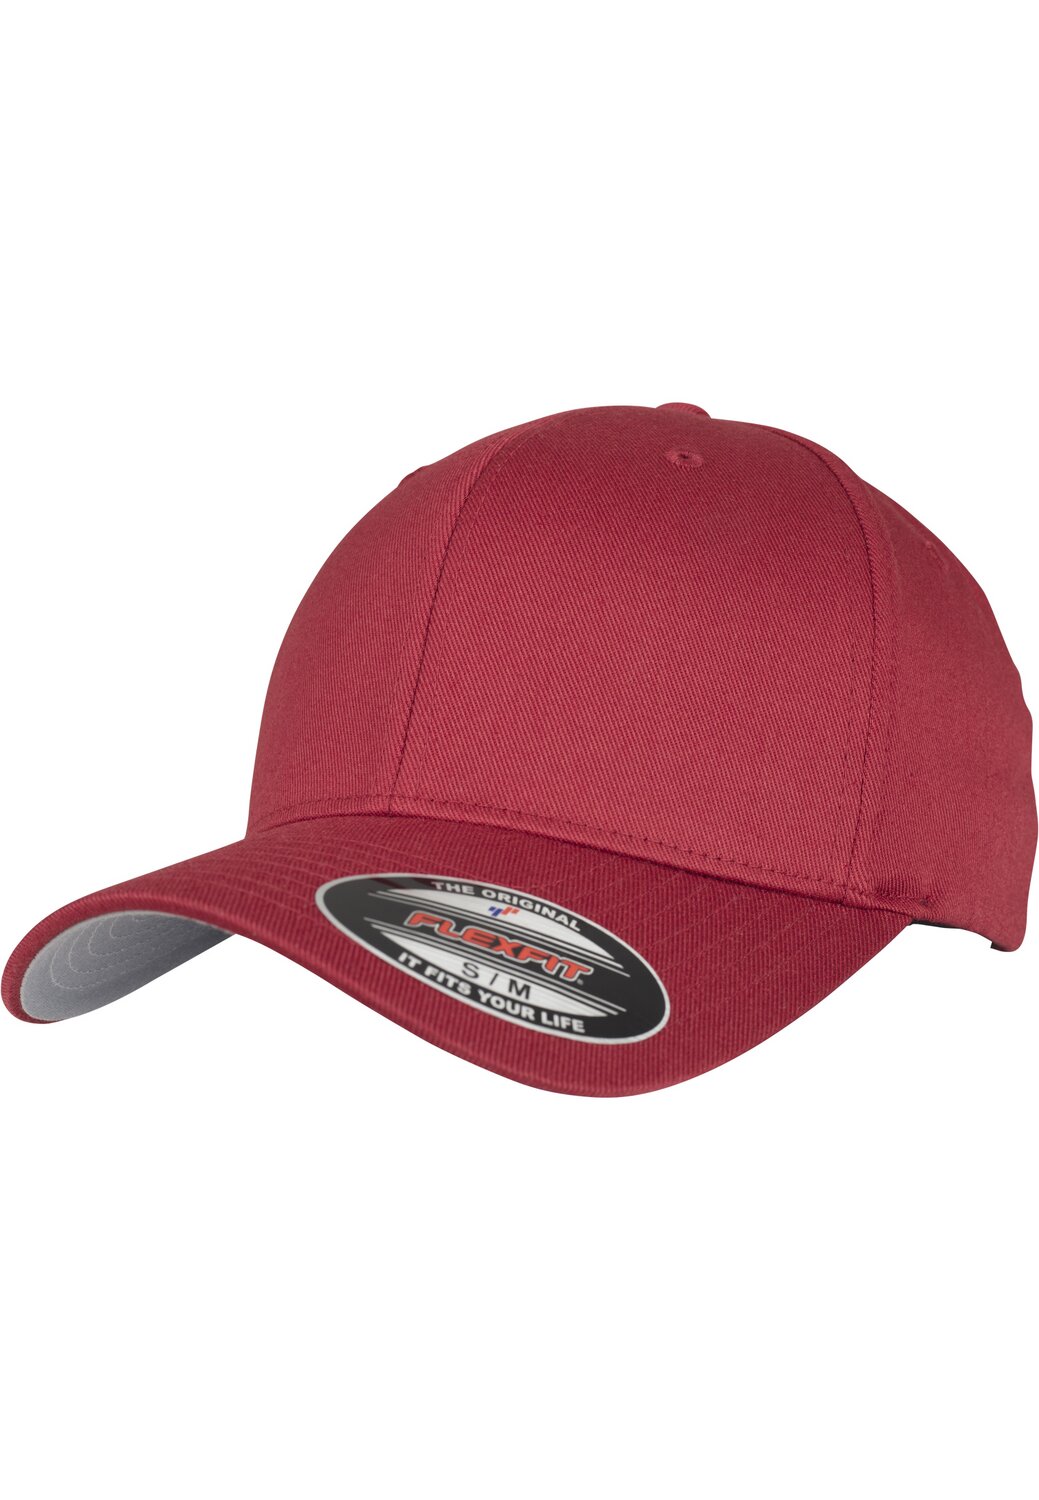 Baseball Cap Wooly Combed Flexfit rose brown | MAXISCOOT